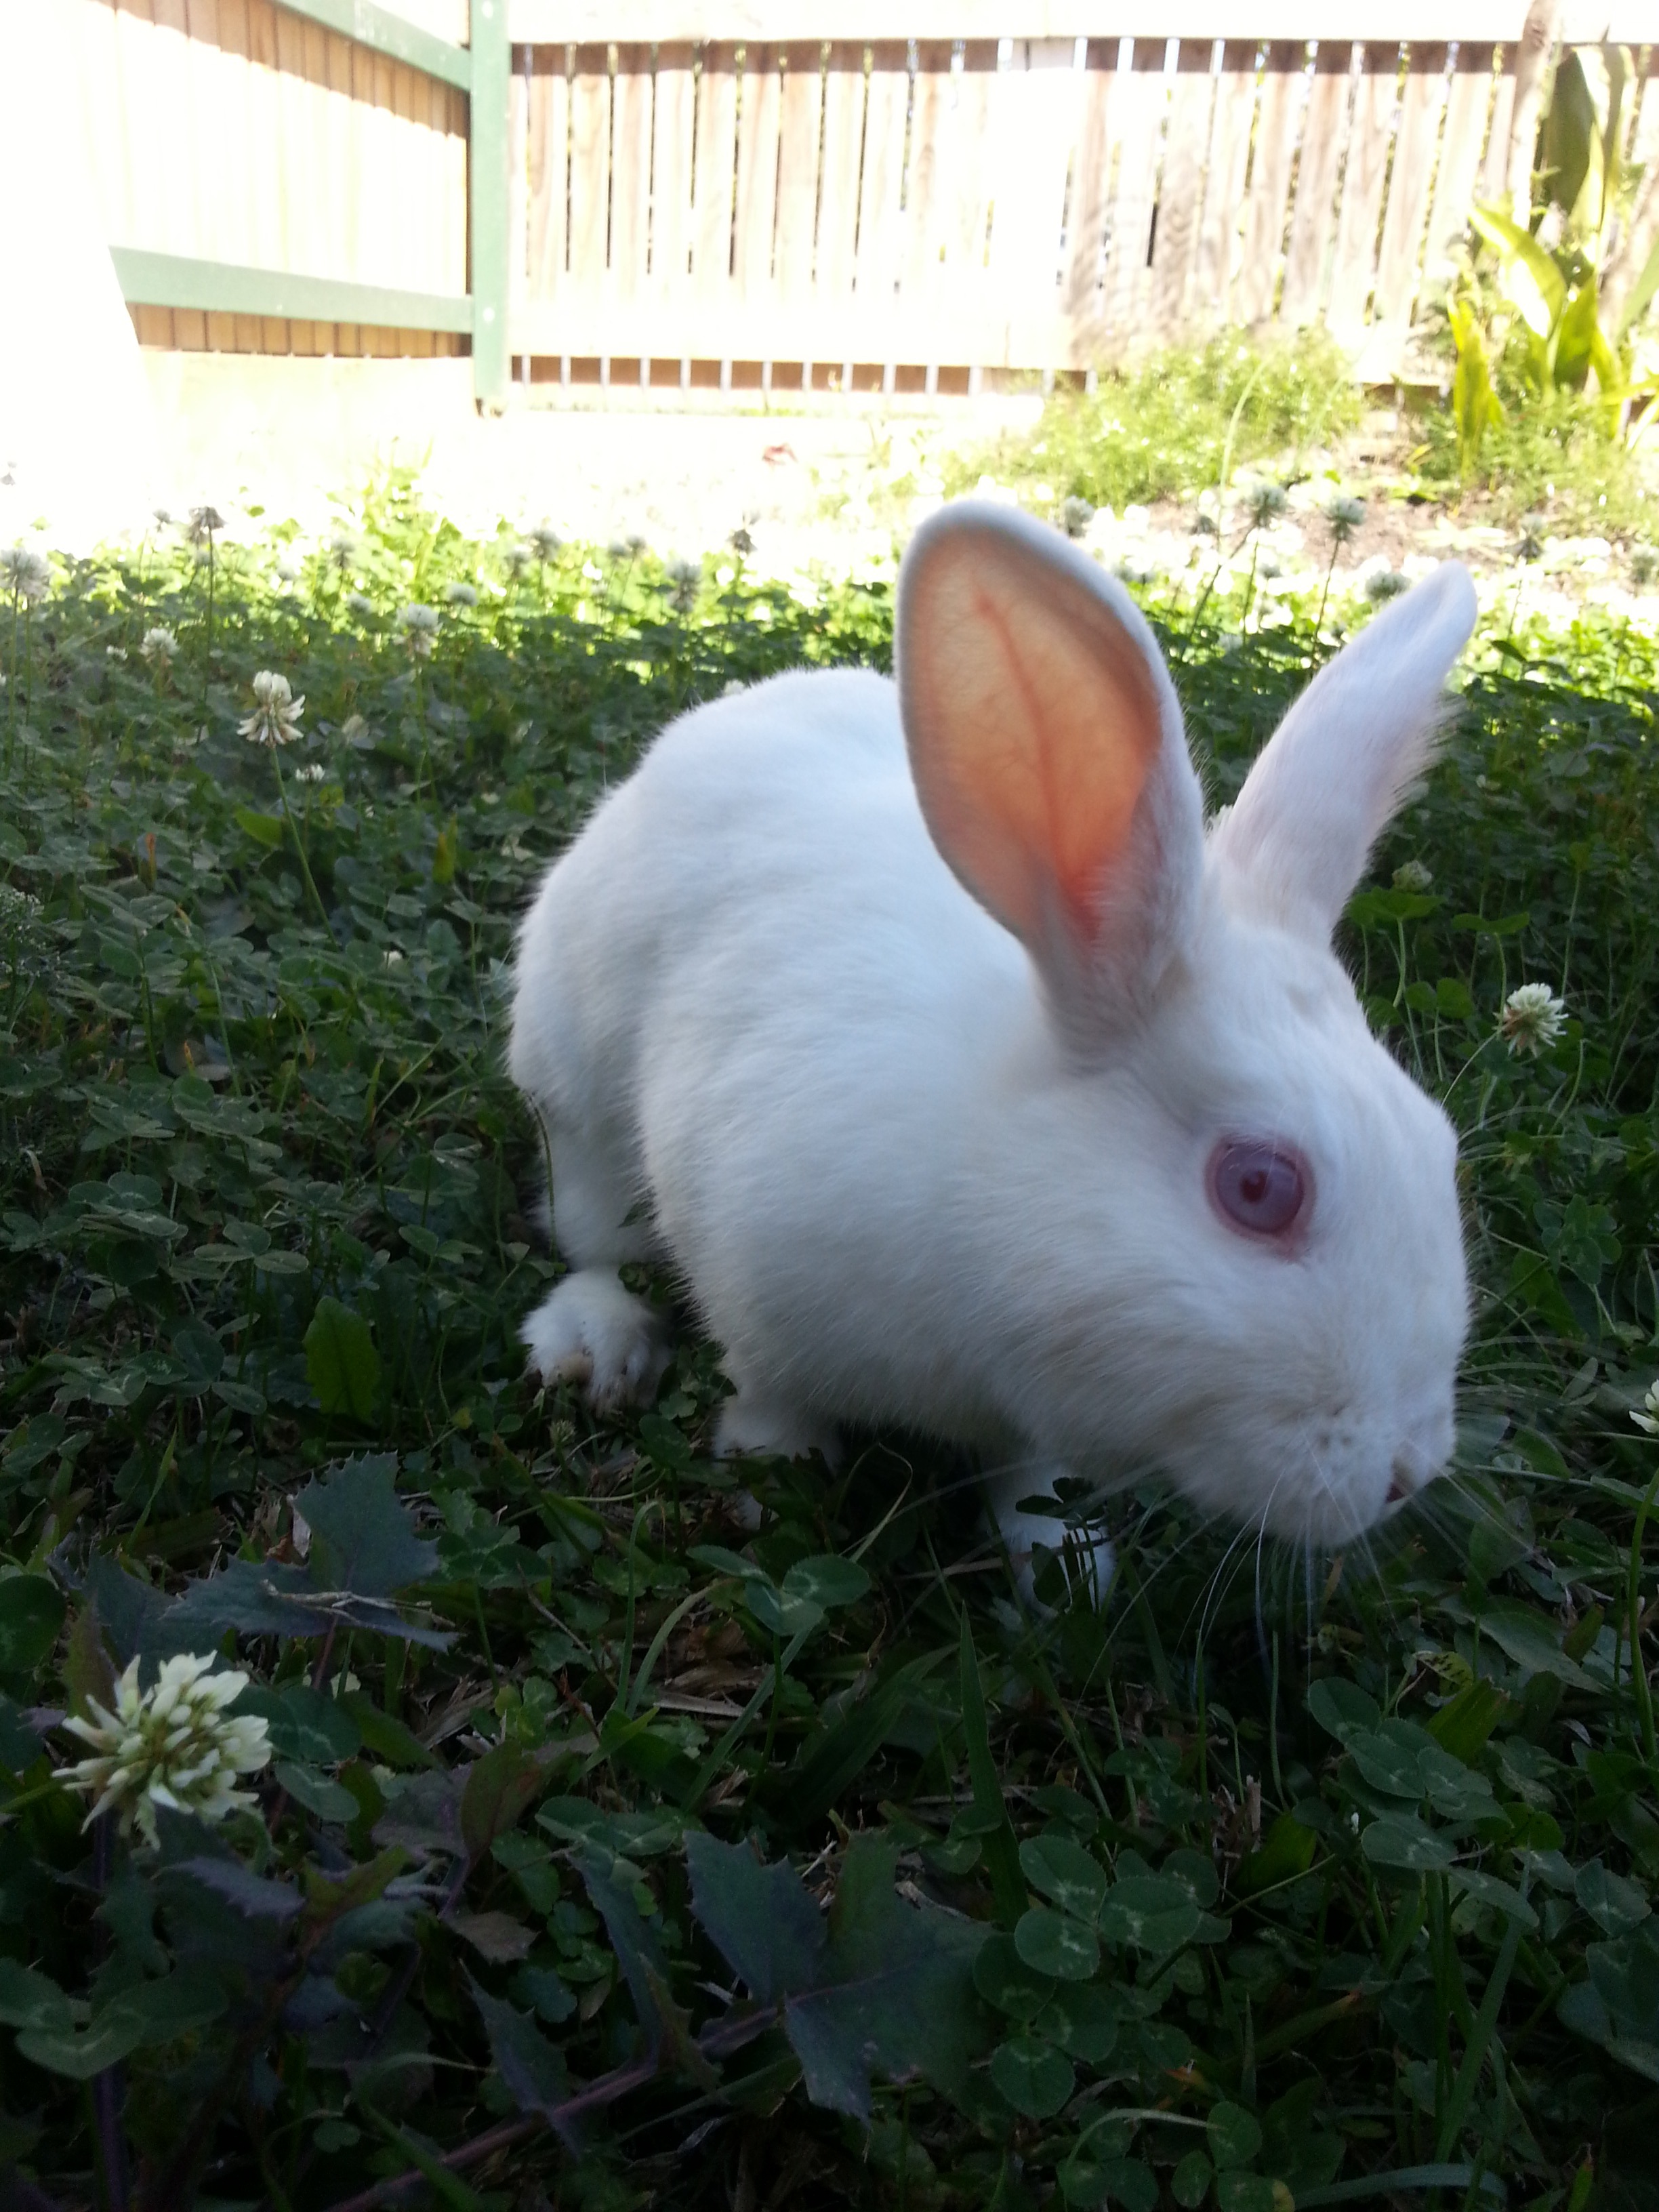 Bunny Sniffs All the Greenery in the Yard